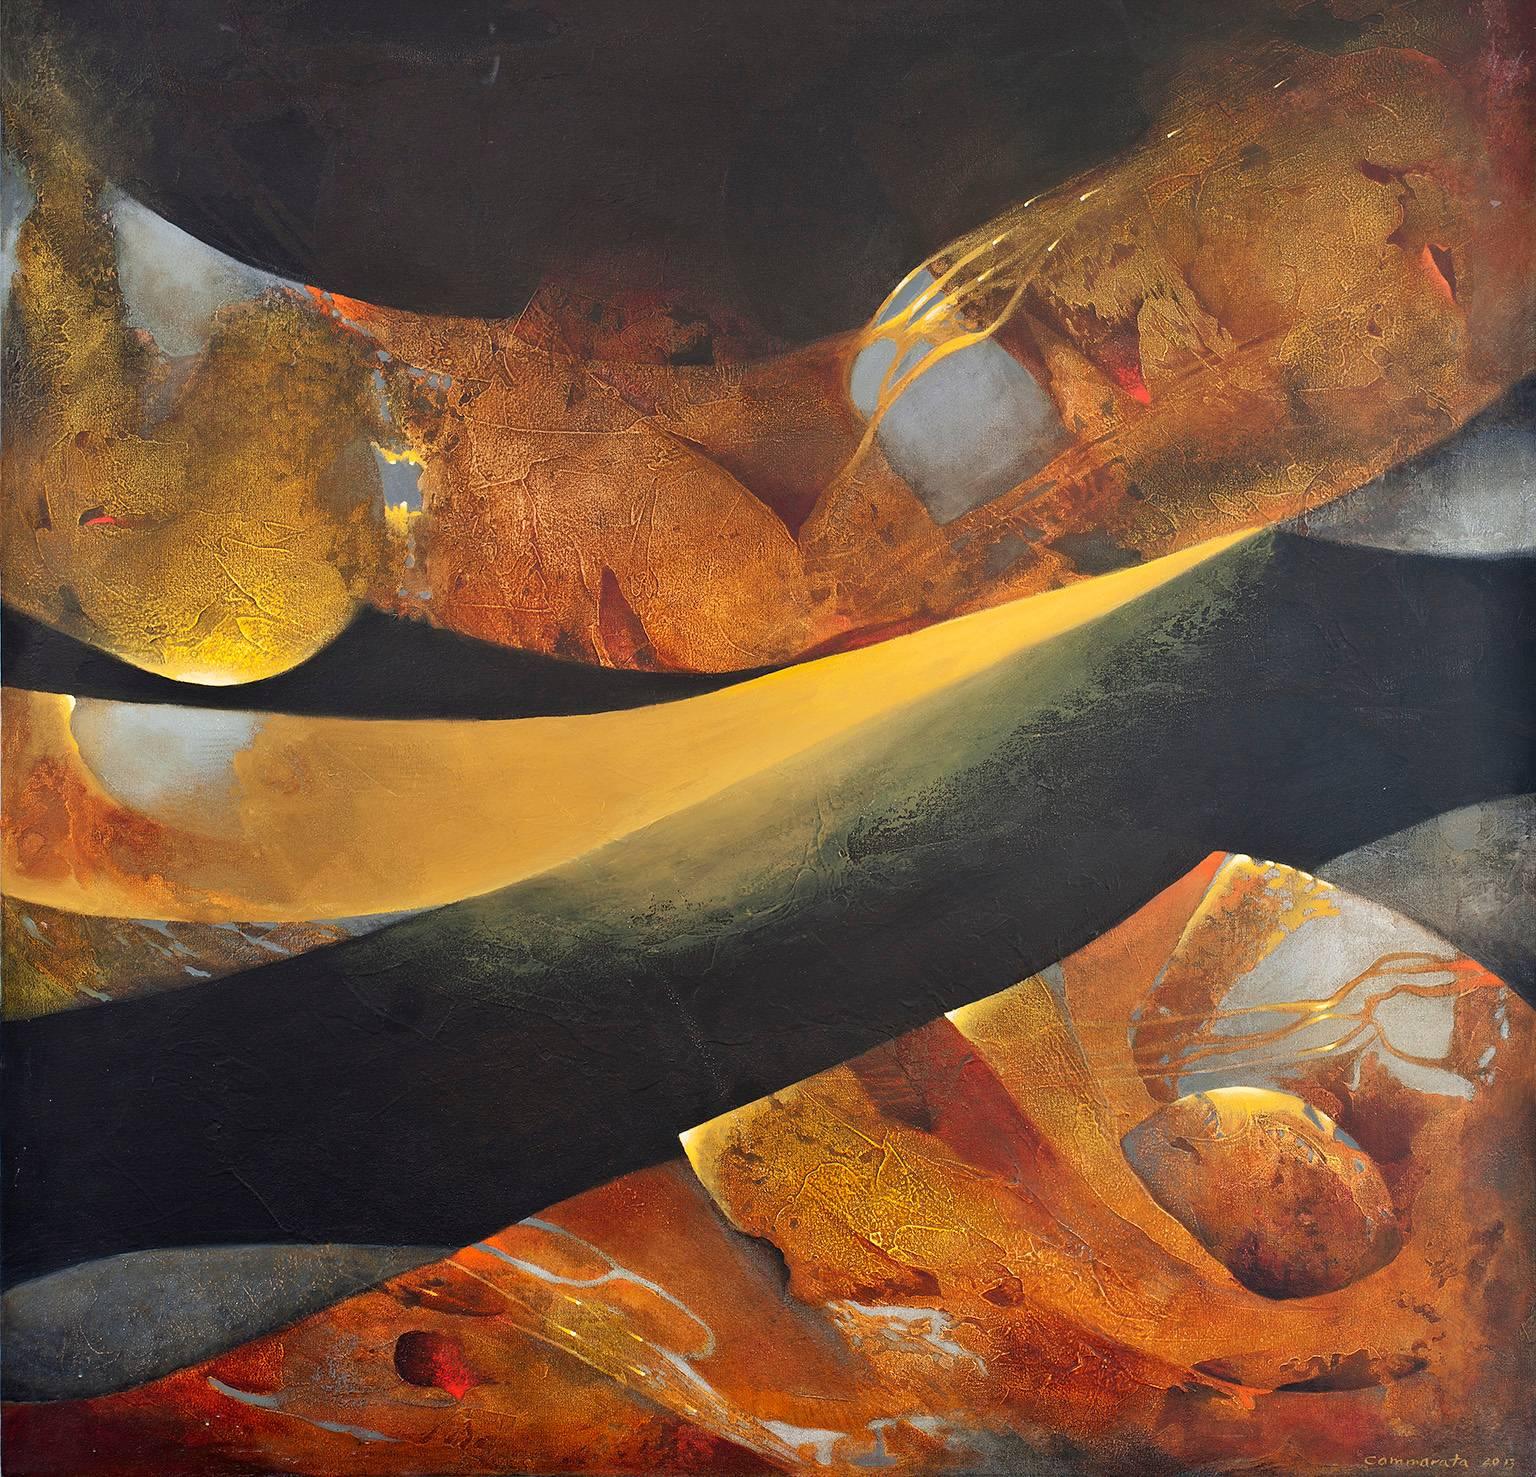 Kathleen Cammarata Abstract Painting - "Frontier" - Horizontal abstract painting in sienna, ochre and black colors. 